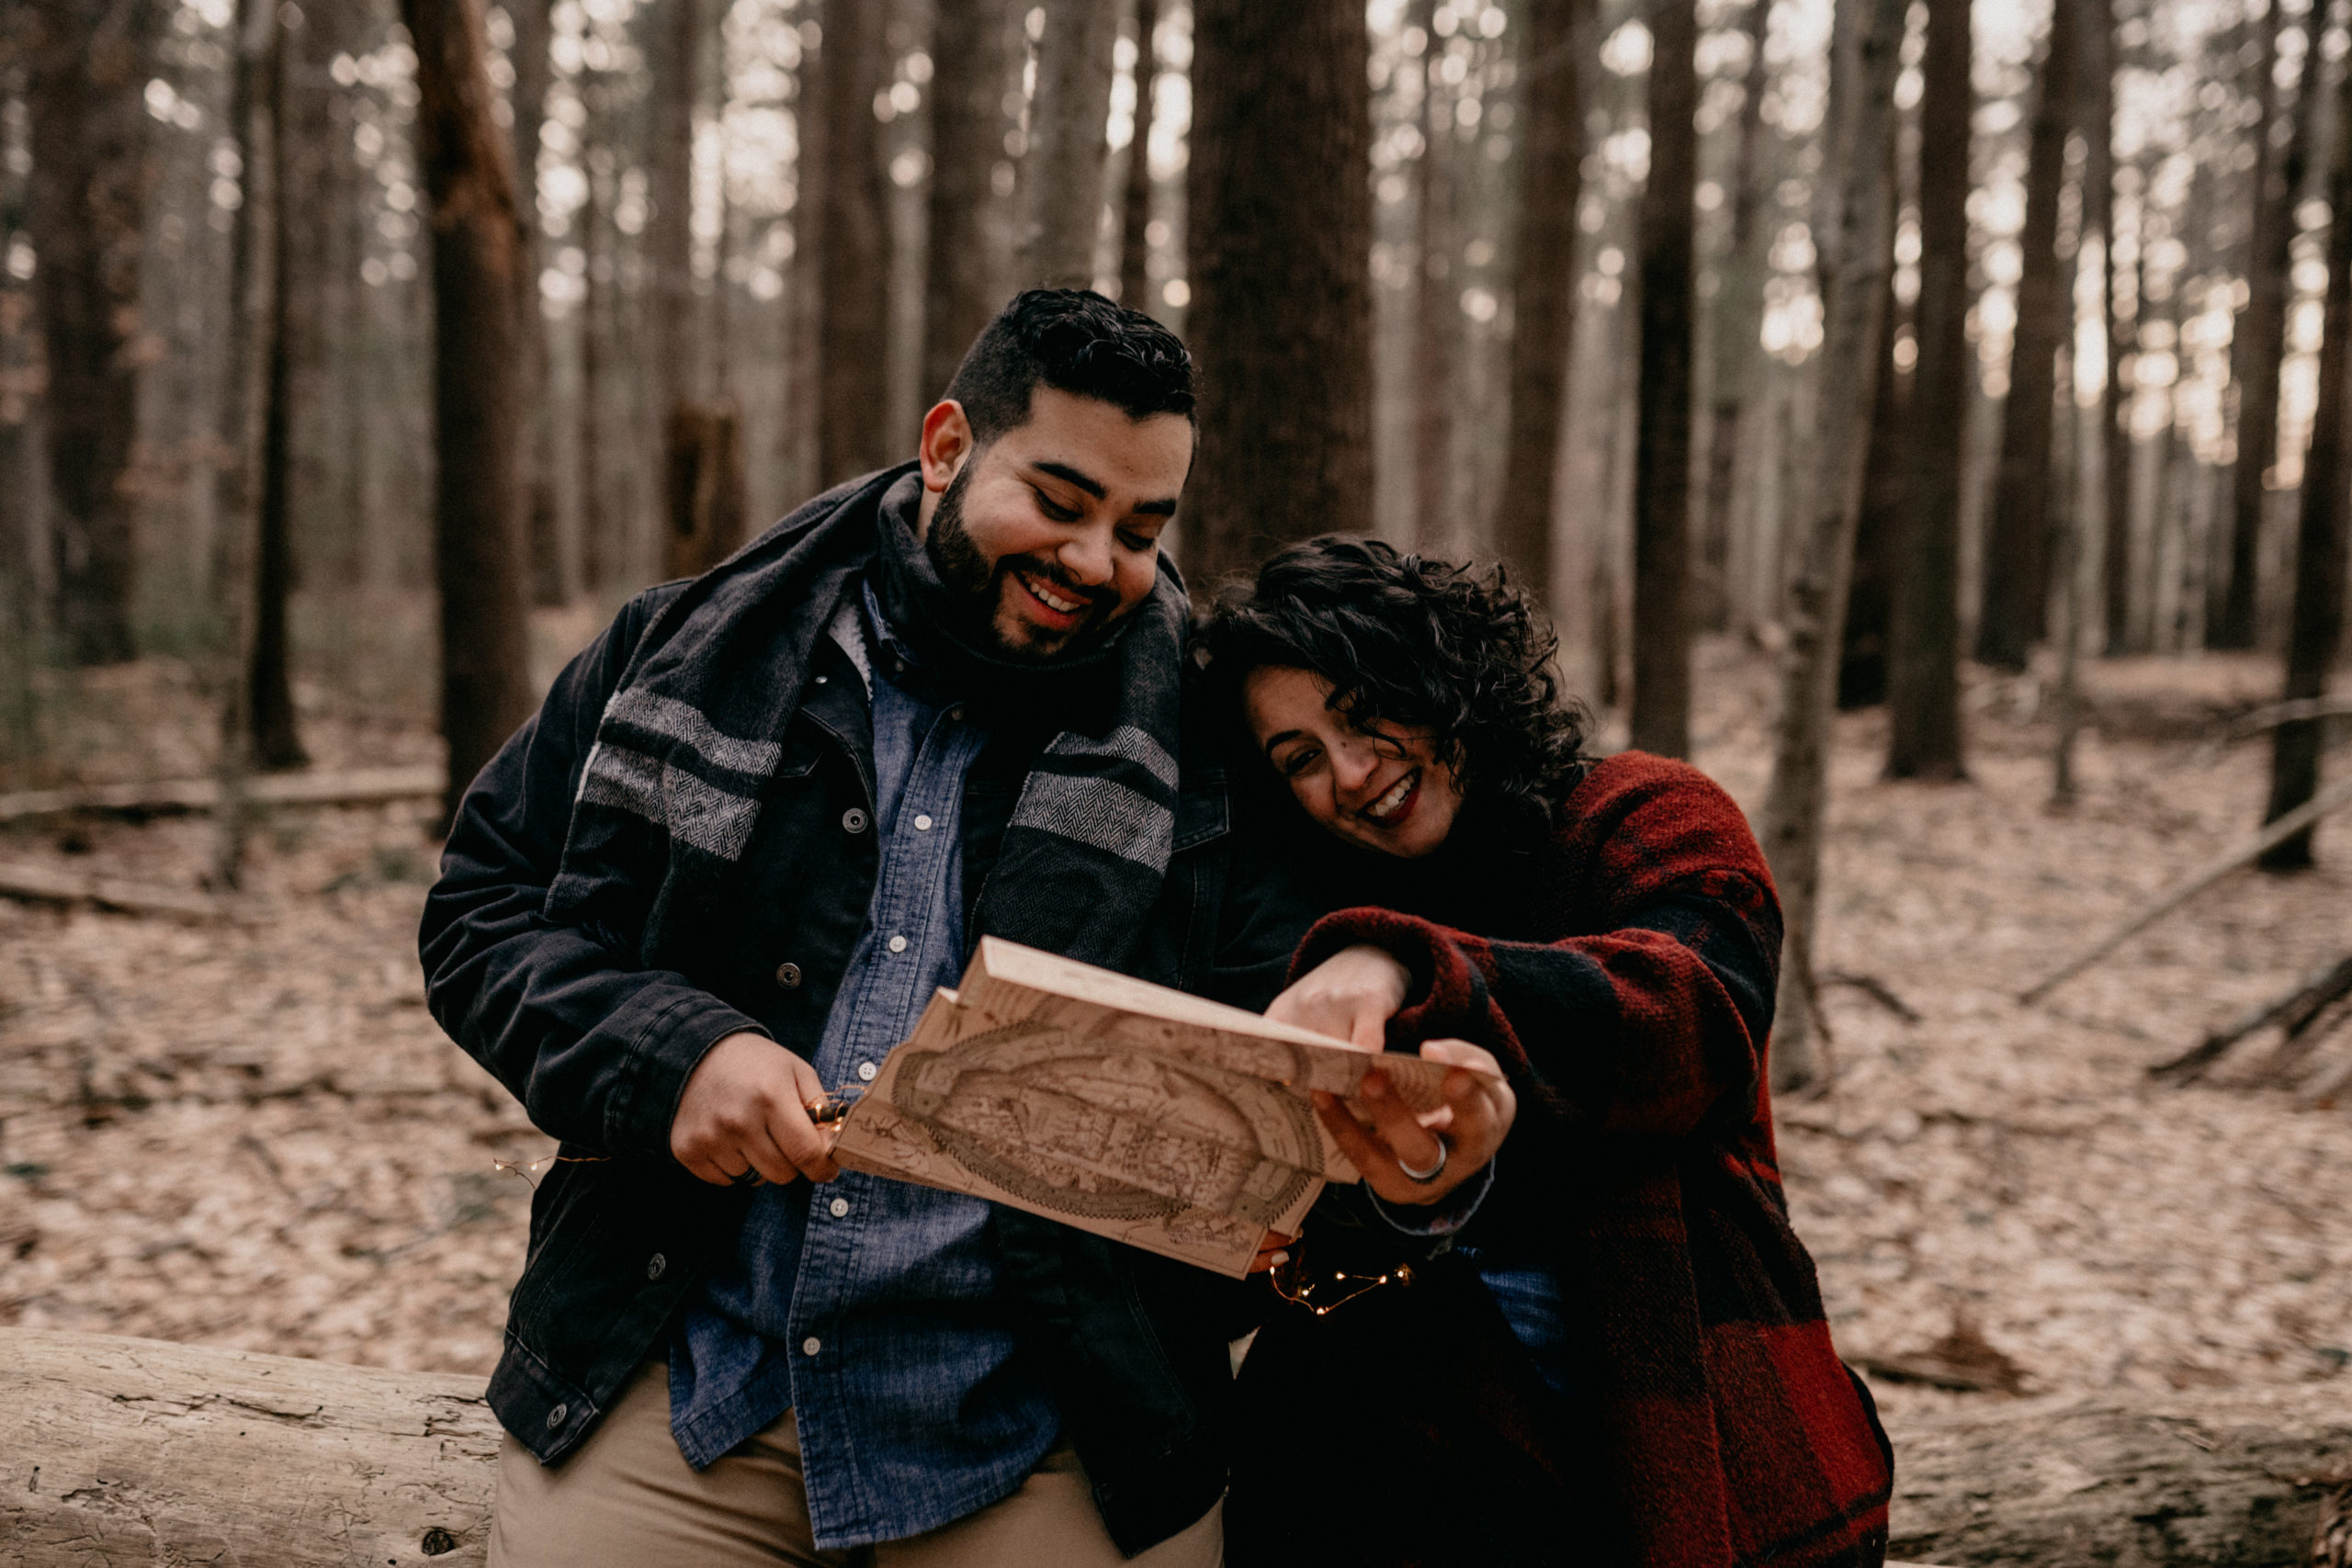 Couple holding wizard wands from Harry Potter at Engagement Session on Long Island, NY